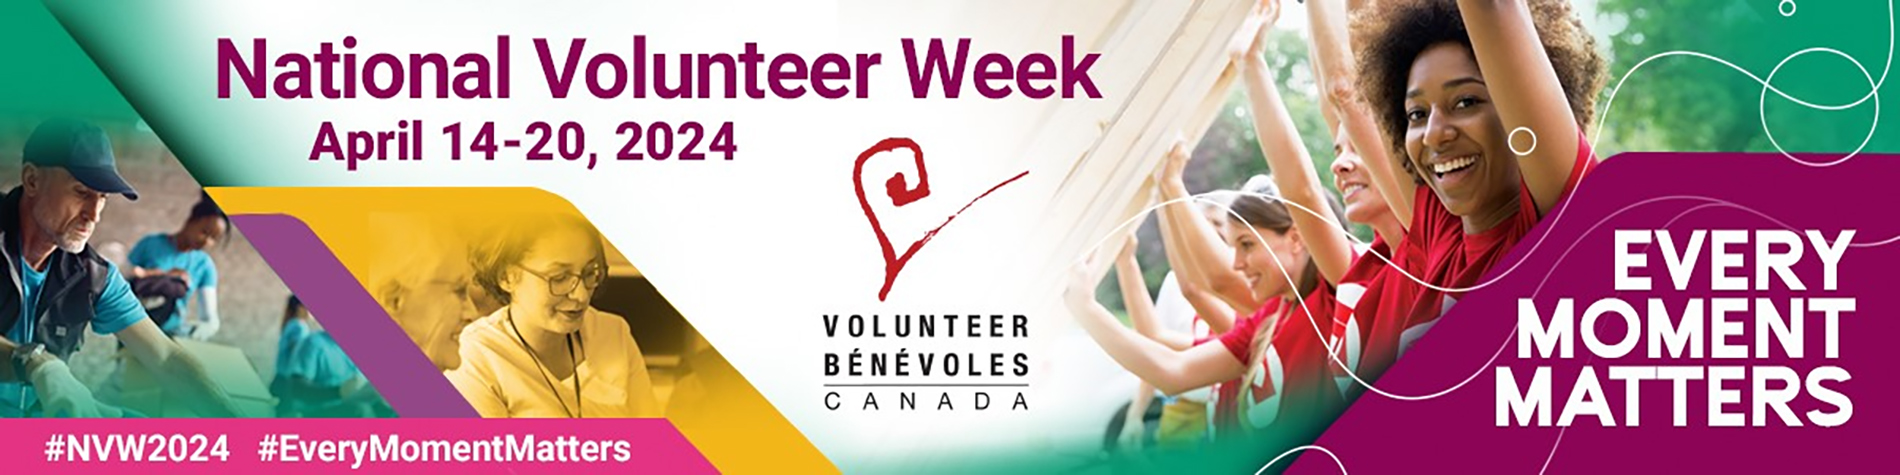 <p class="slider-title">Thank You | Three Cheers for CBE Volunteers</p><div class="banner-line"></div><p class="slider-subtitle">The CBE extends our gratitude to all the incredible volunteers.</p> <a style="pointer-events:all" class=AEBannerMoreLink href="https://cbe.ab.ca/news-centre/Pages/thank-you-three-cheers-for-cbe-volunteers.aspx">Read More</a>